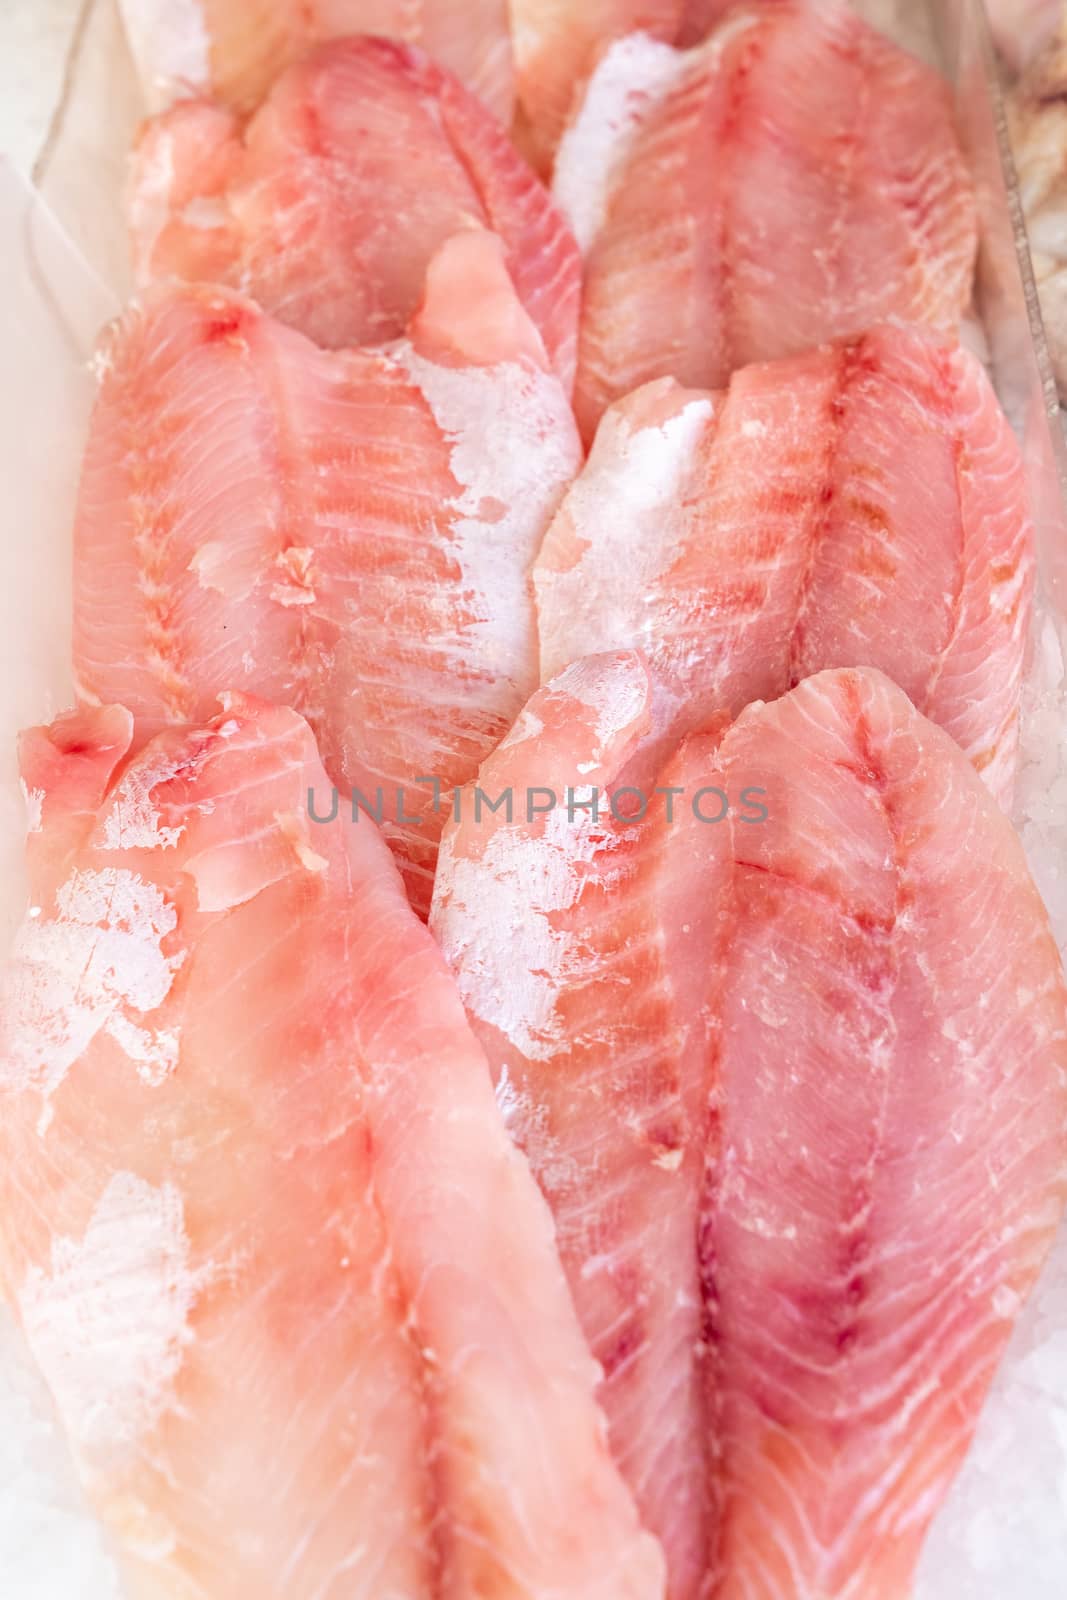 African perch fillet on ice at seafood market,healthy life concept, diet.